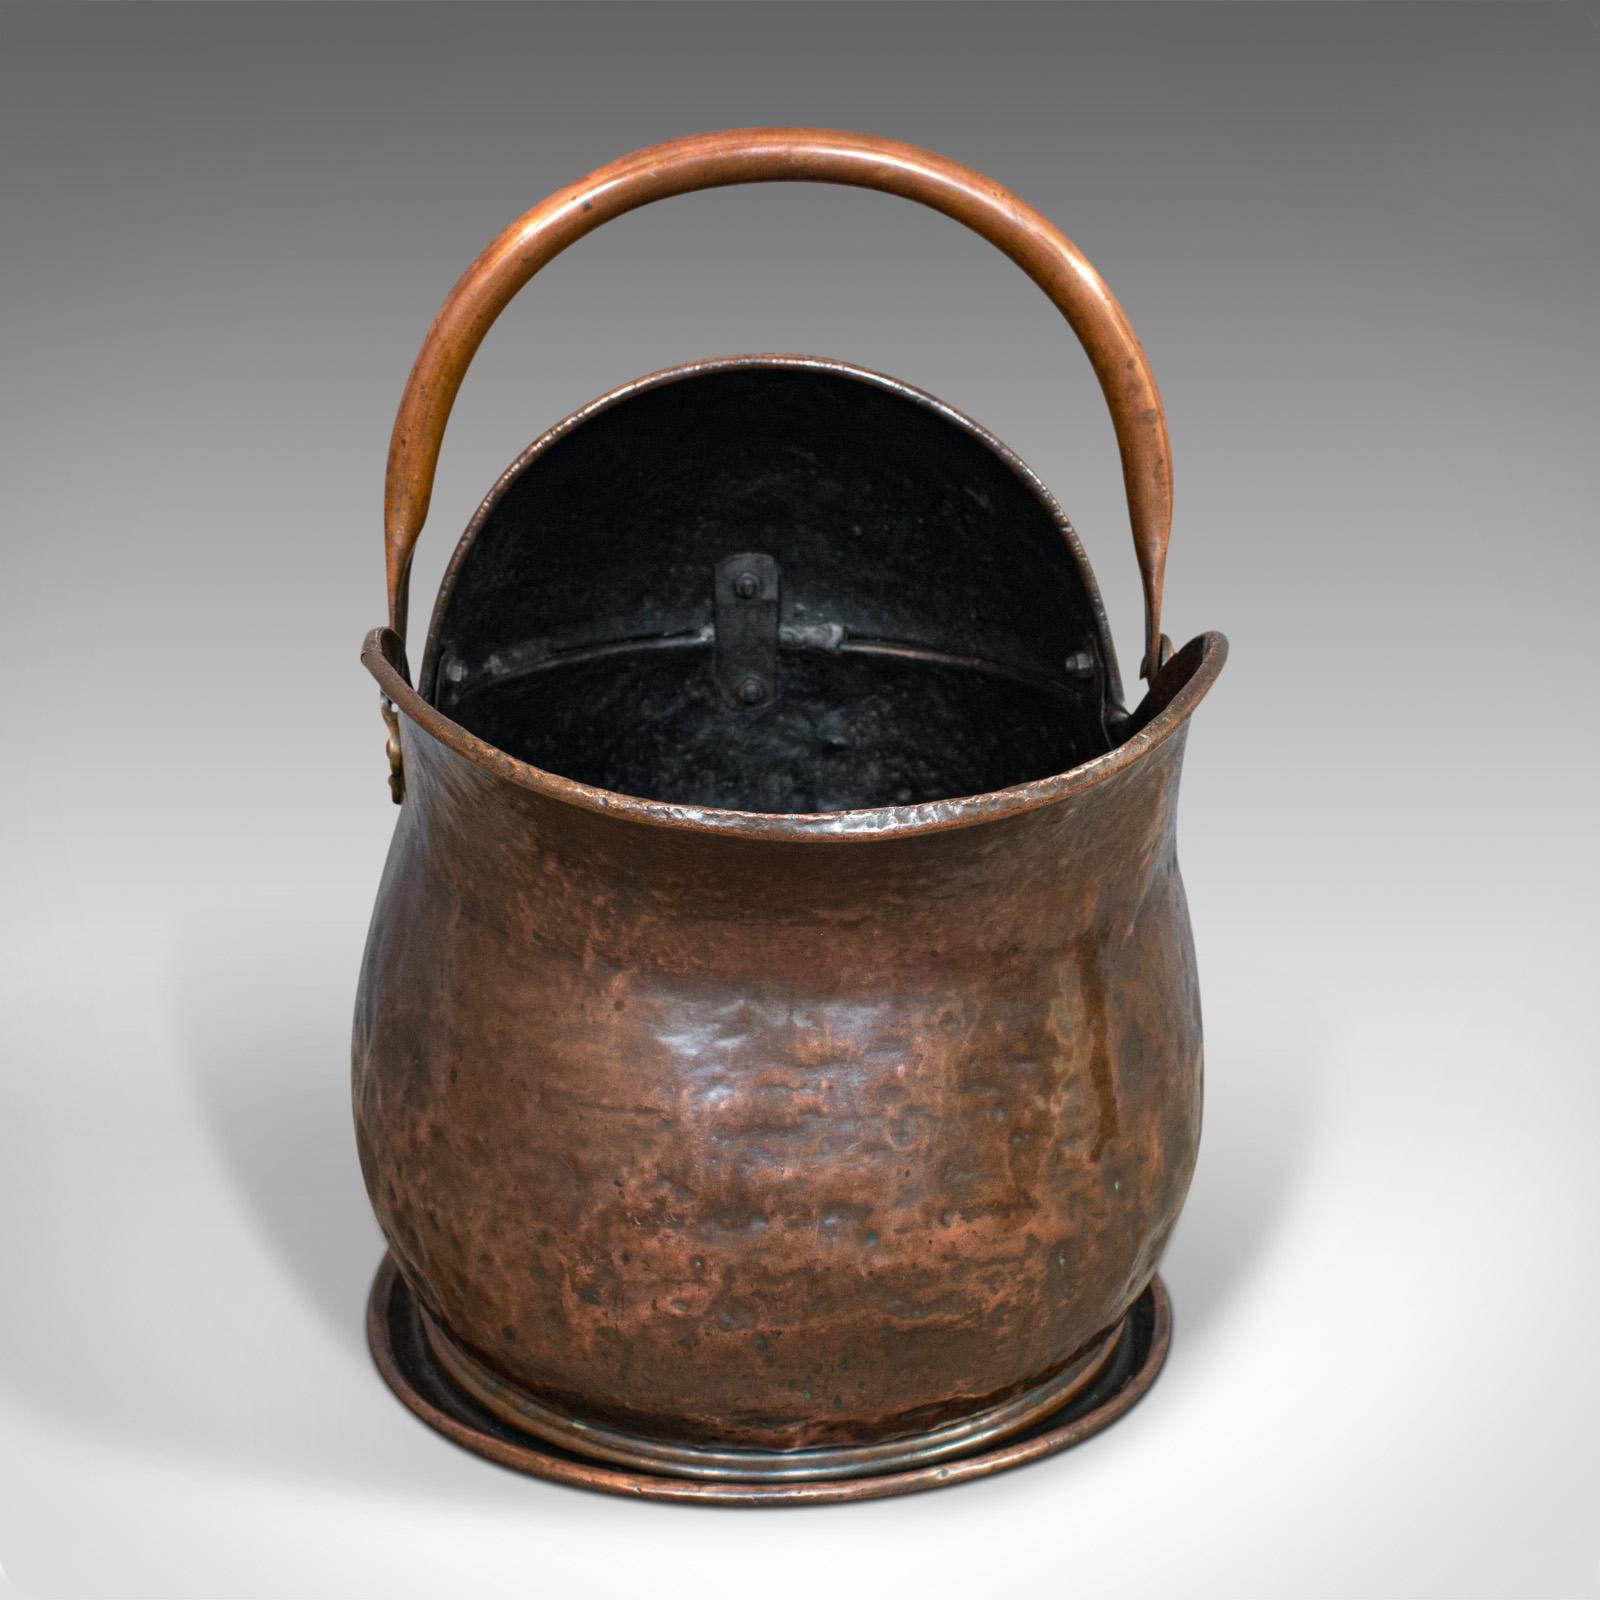 This is an antique coal bucket. An English, copper fireside scuttle, dating to the Victorian period, circa 1870.

Victorian fireside chic
Displays a desirable aged patina
Copper with appealing weathering and tonality

Swivel loop handle with